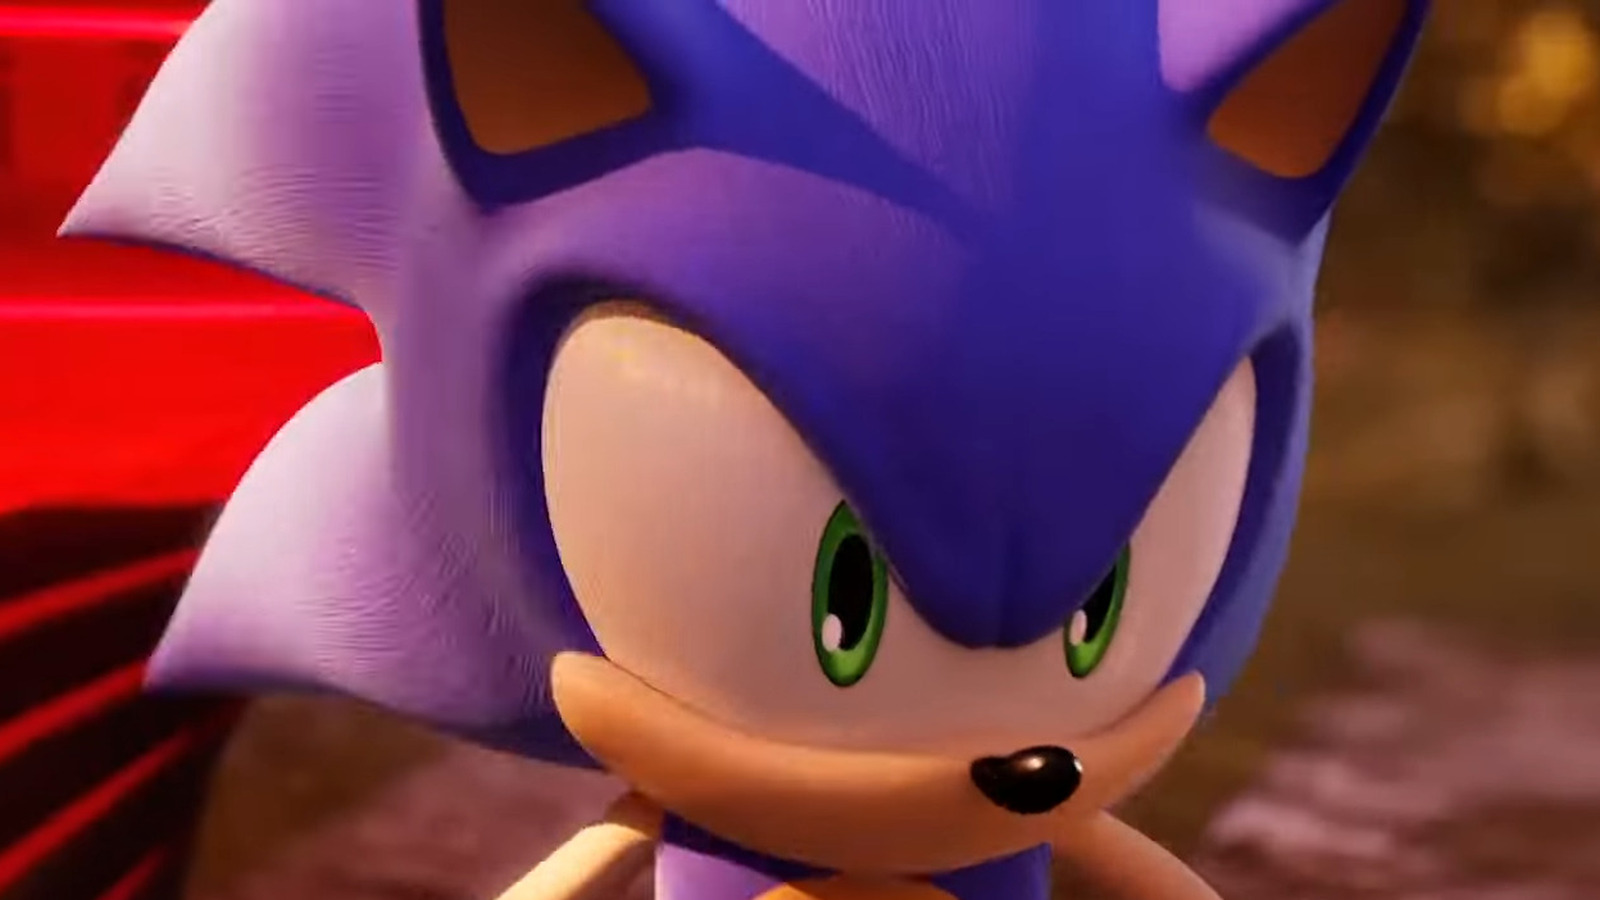 Sega details Sonic Frontiers features and gameplay